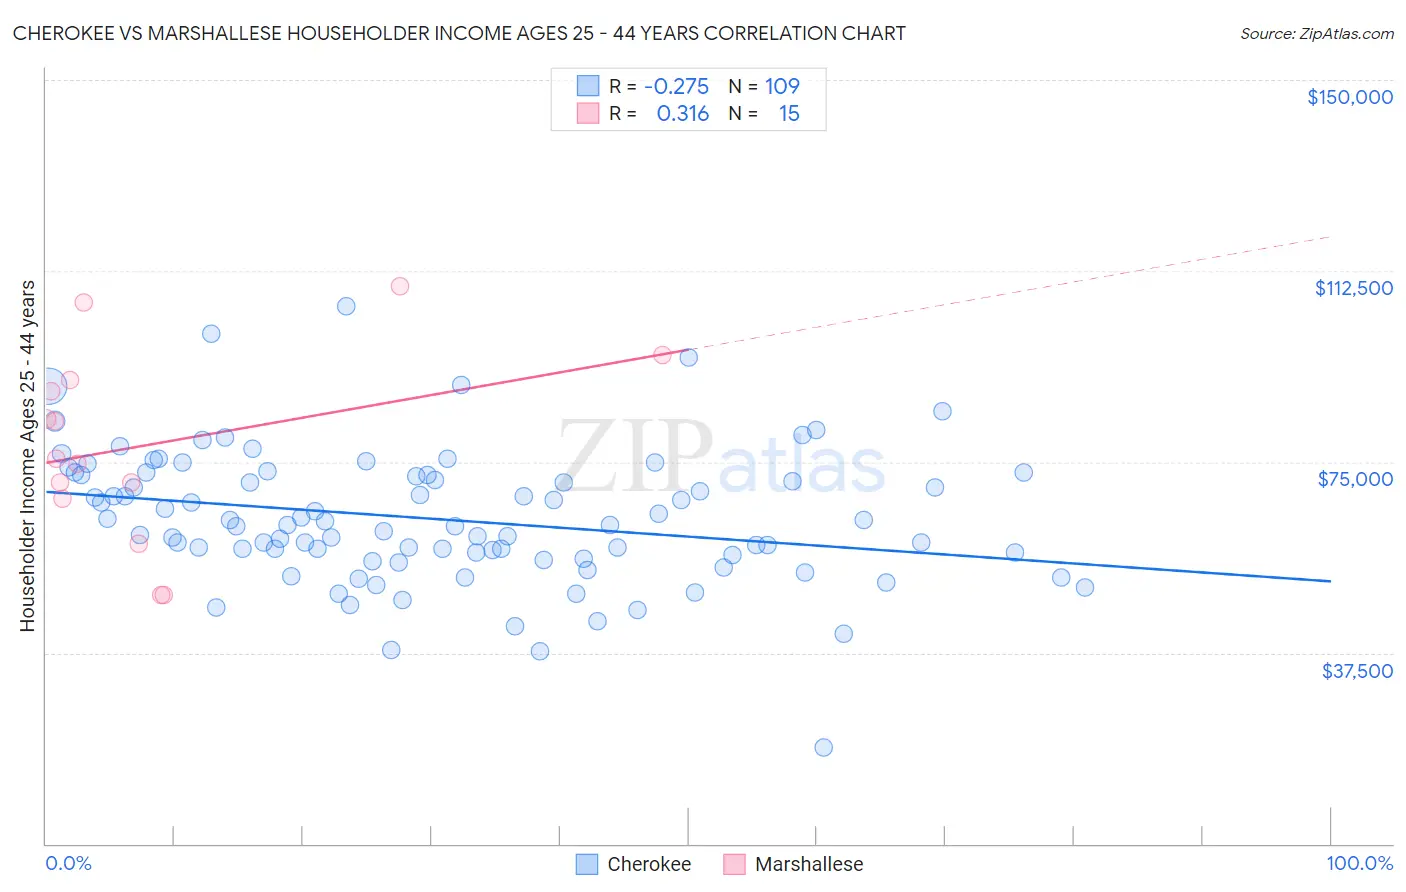 Cherokee vs Marshallese Householder Income Ages 25 - 44 years